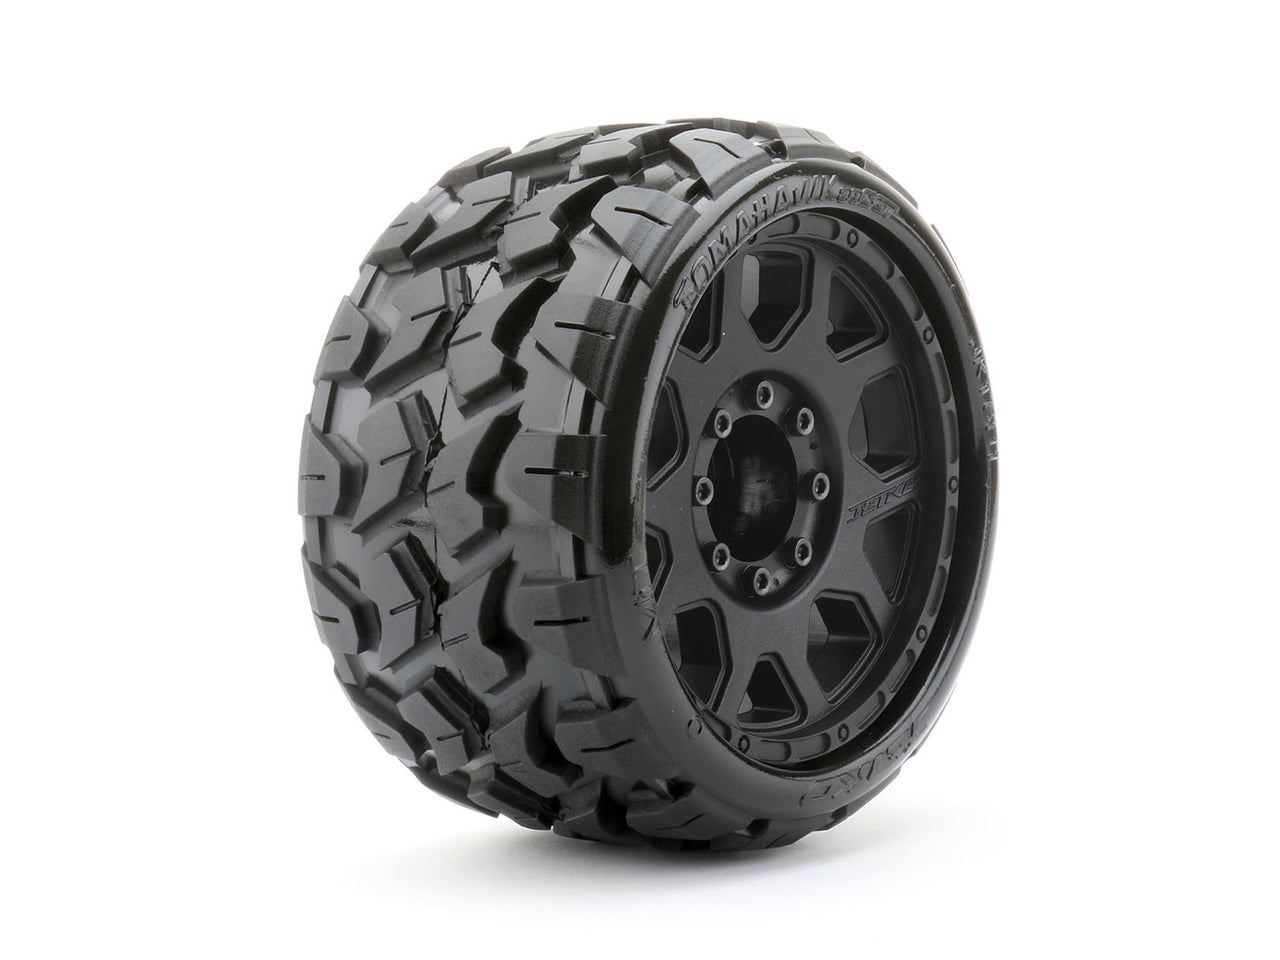 JKO1601CBMSGBB3  1/8 SGT 3.8 Tomahawk Tires Mounted on Black Claw Rims, Medium Soft, Belted, 12mm (for Traxxas Hoss)